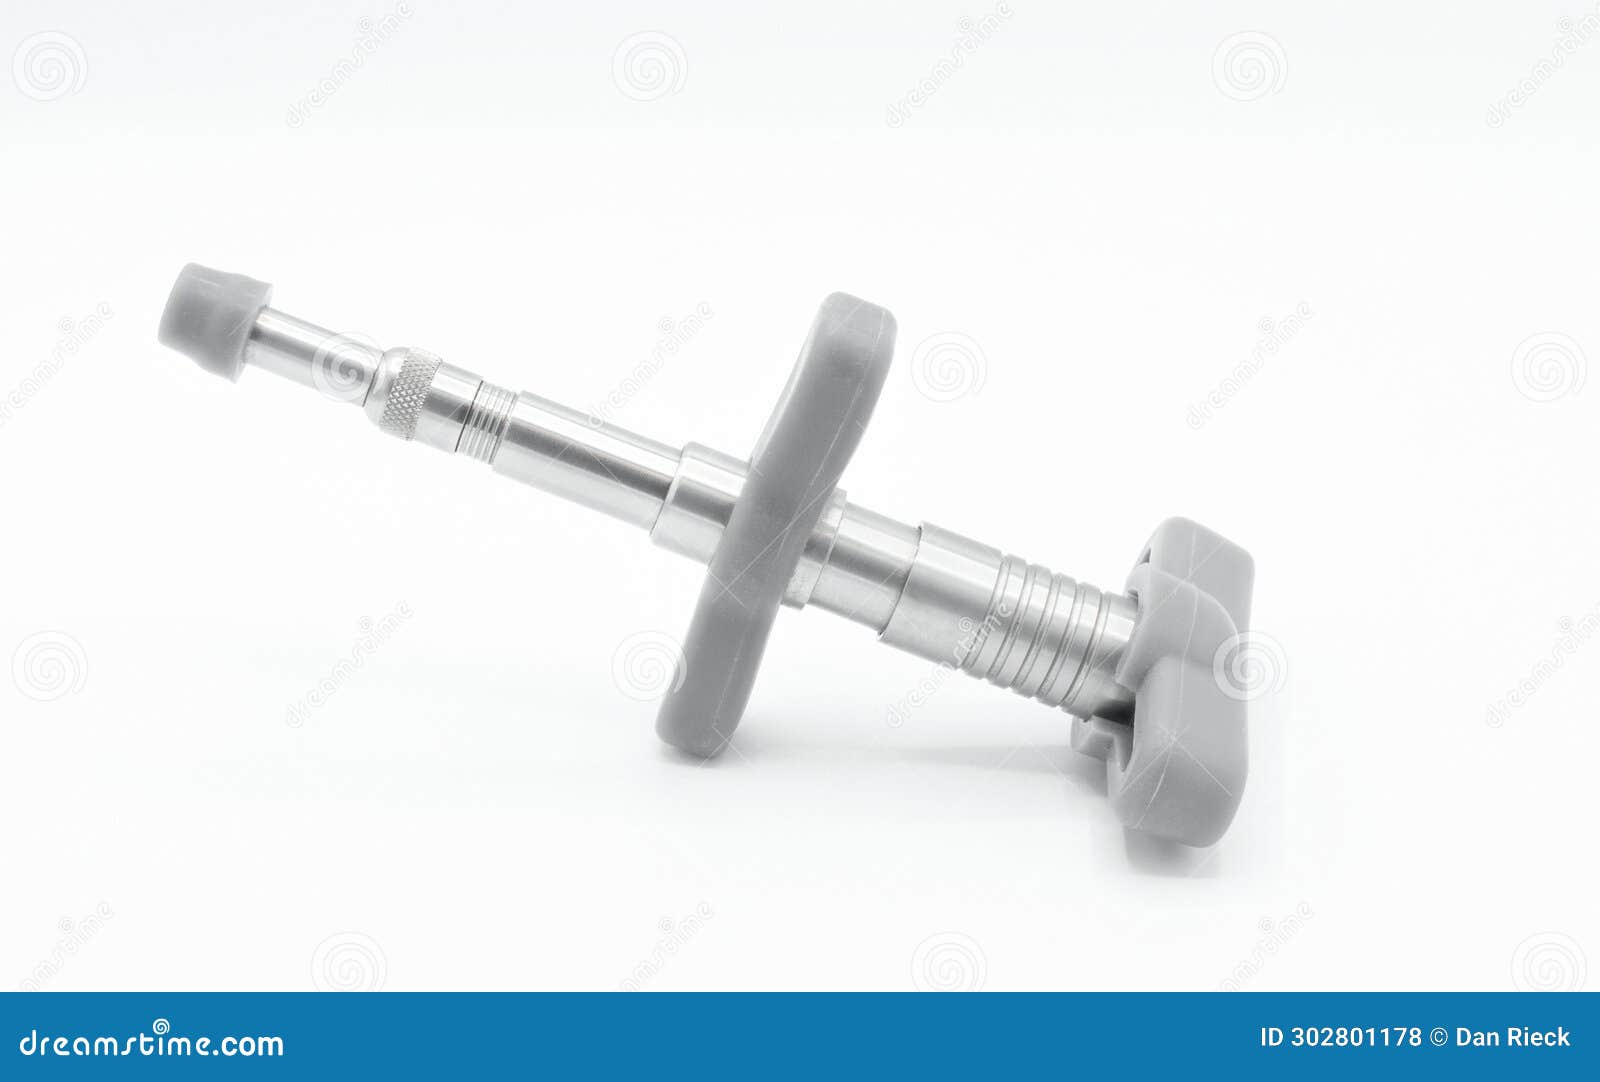 chiropractic activator 1 stainless steel tool  on white background. spine and joint manipulation adjustment tool